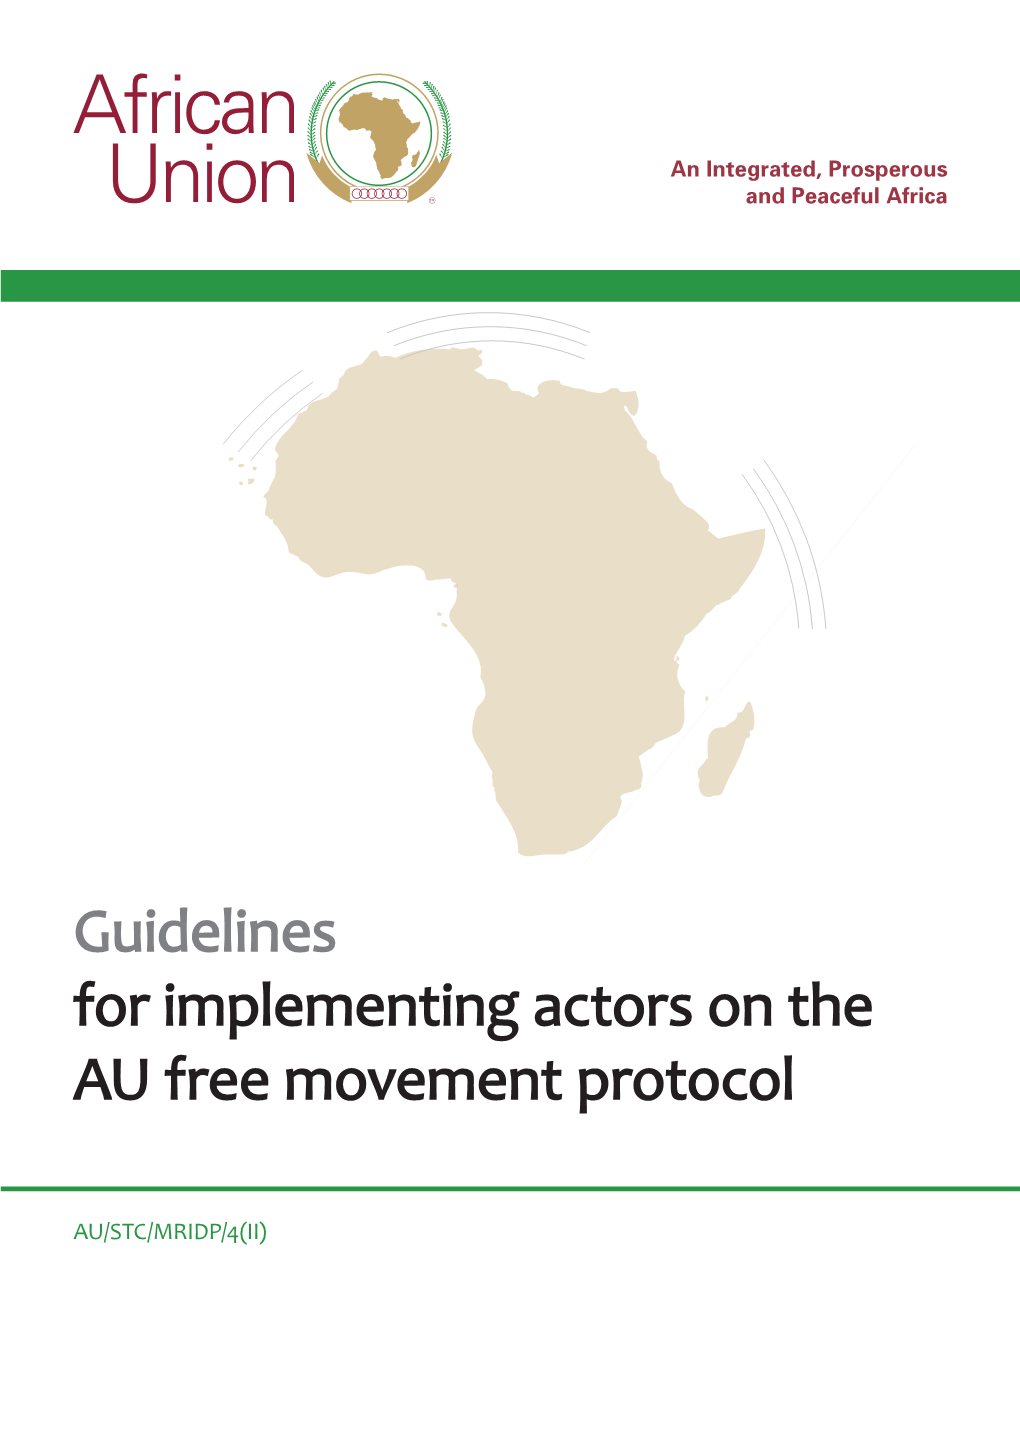 Guidelines for Implementing Actors on the AU Free Movement Protocol